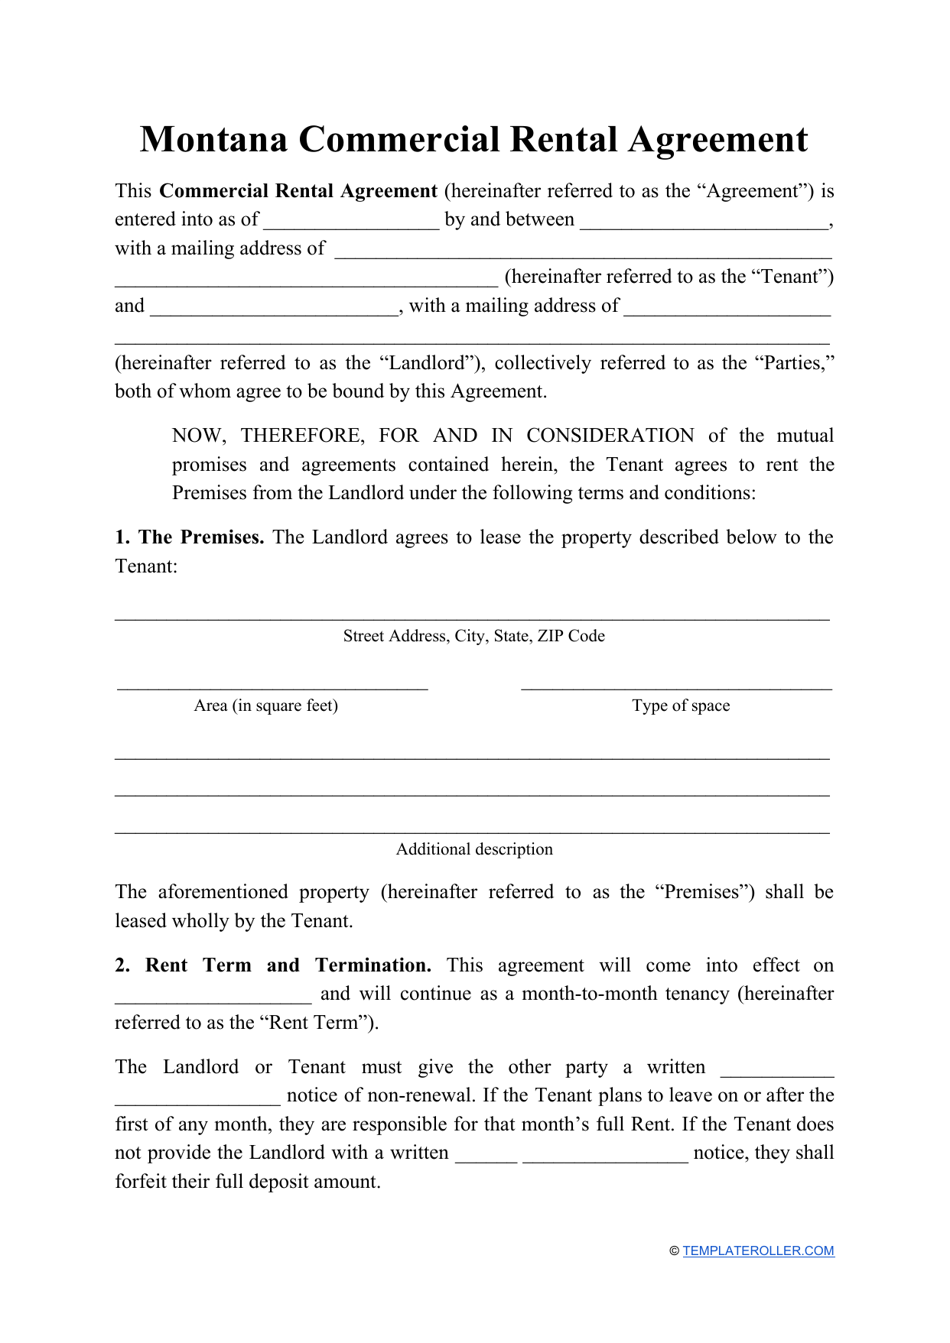 Commercial Rental Agreement Template - Montana, Page 1